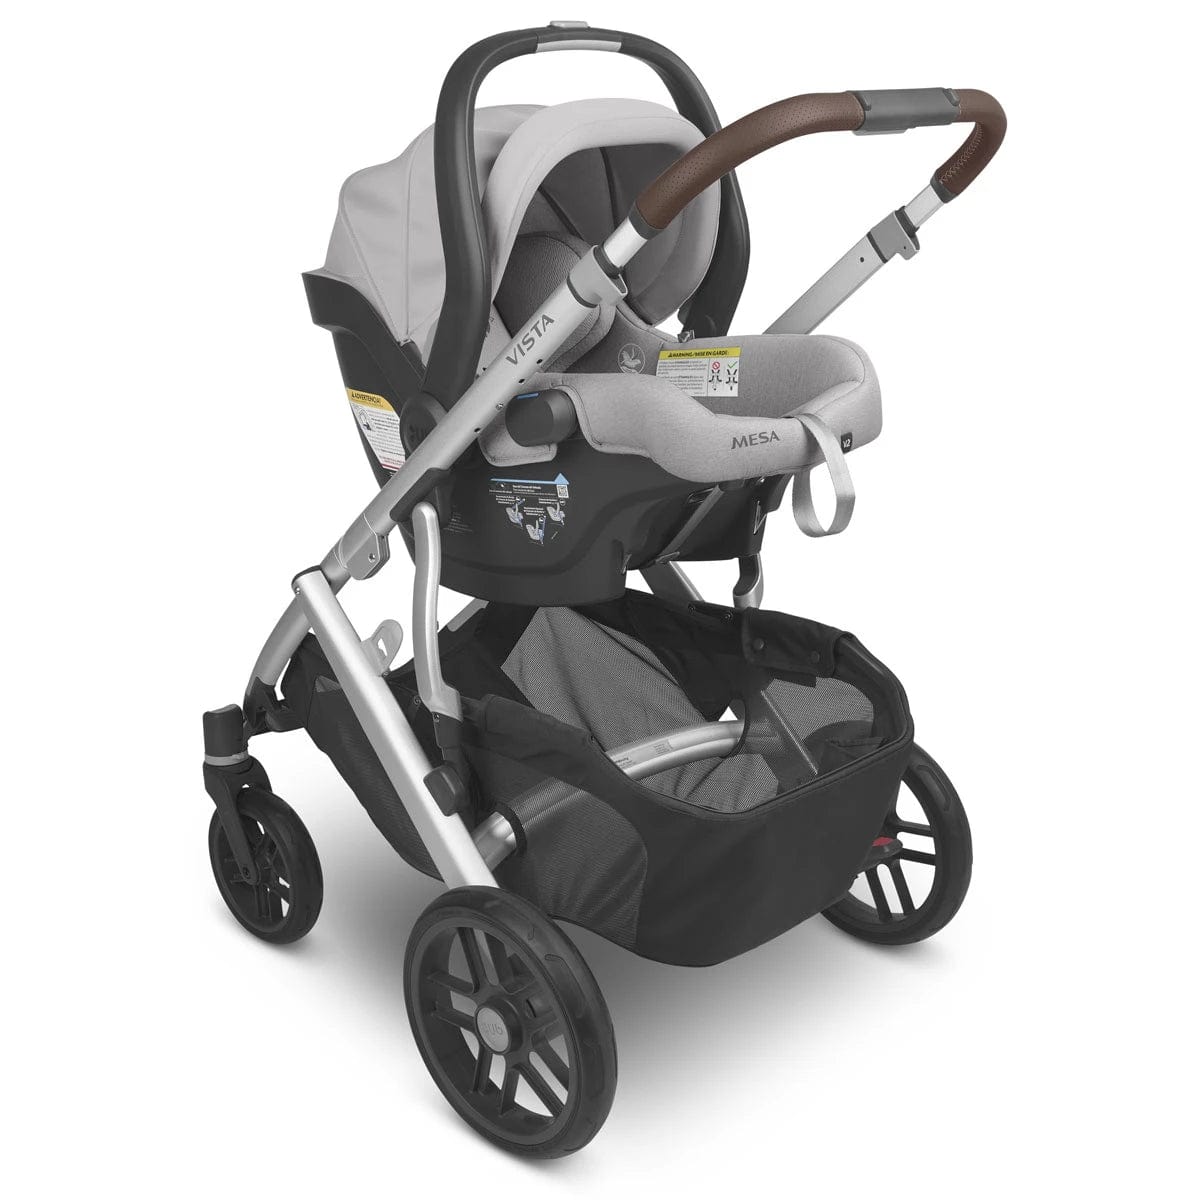 UPPAbaby infant car seat UPPAbaby MESA V2 Infant Car Seat - Alice